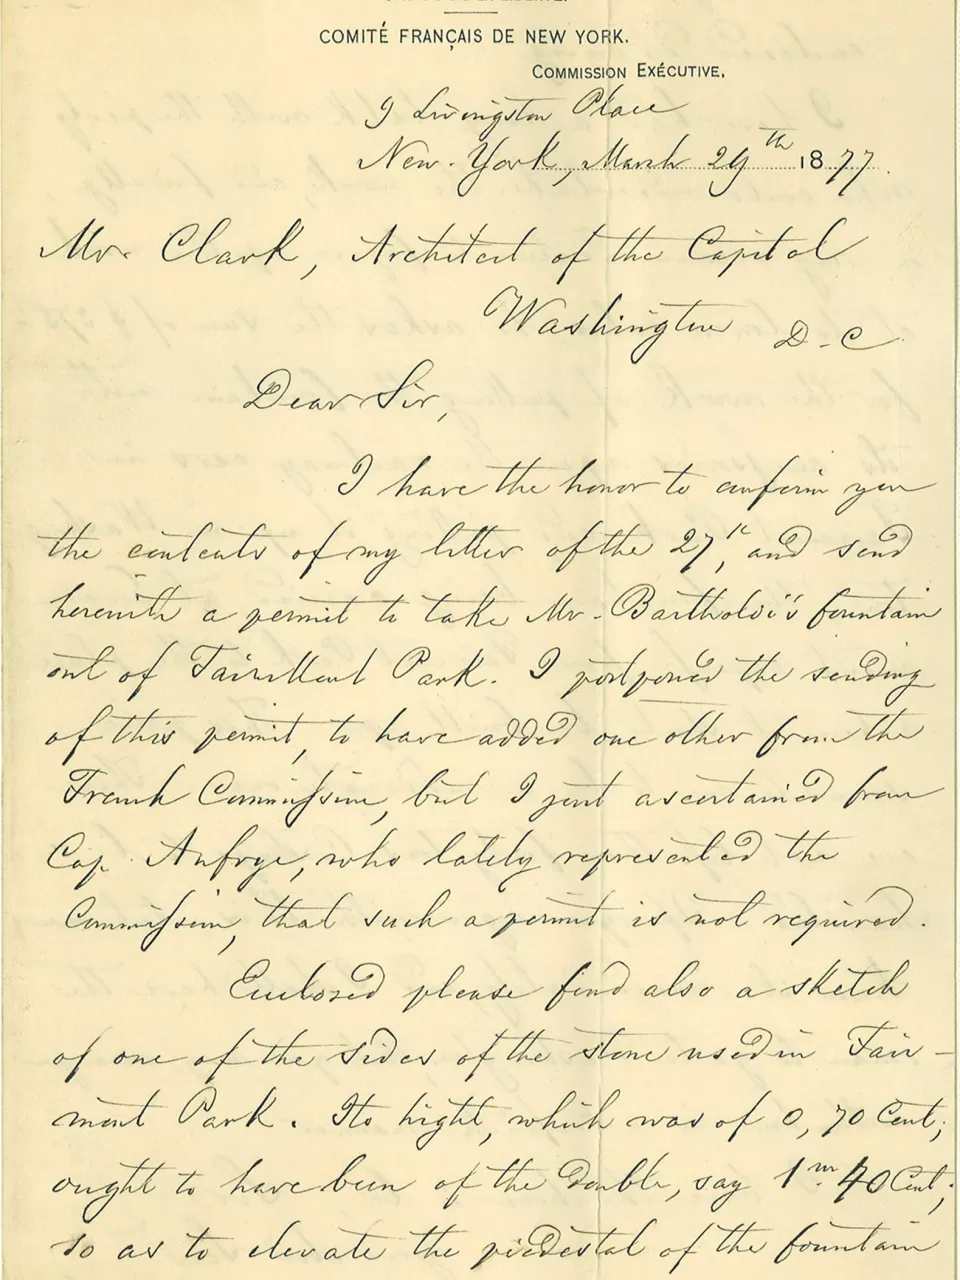 Letter to Architect of the Capitol Edward Clark regarding moving the Bartholdi Fountain from Fairmont Park in New York to Washington, D.C.